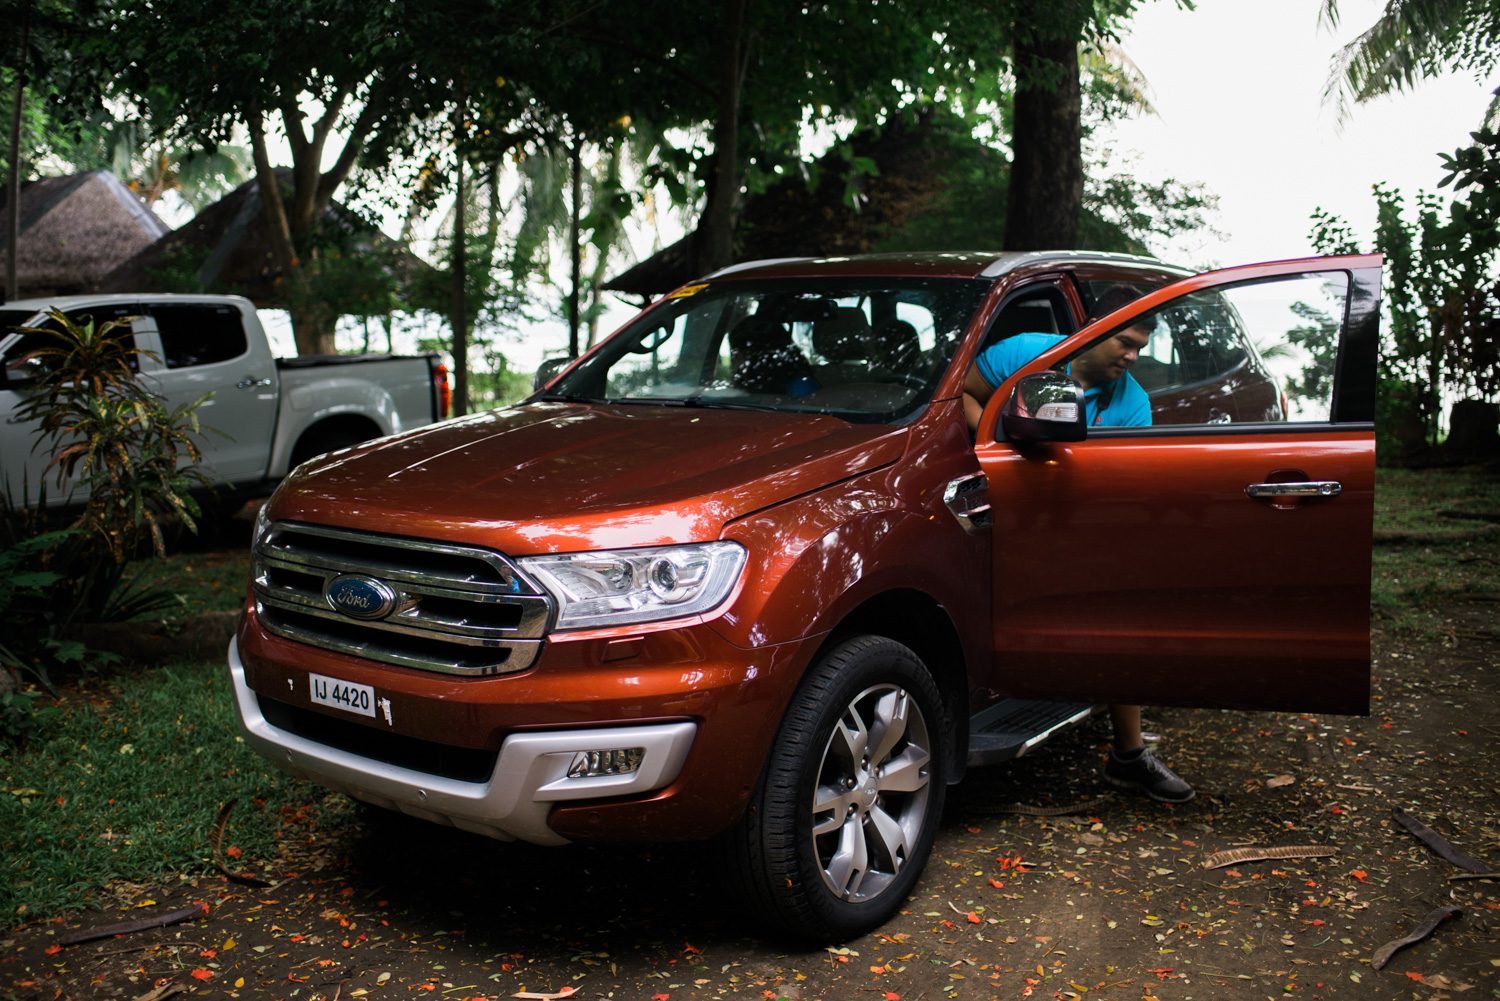 POWER AND COMFORT. The Bonifacio Family rides the spacious Ford Everest 